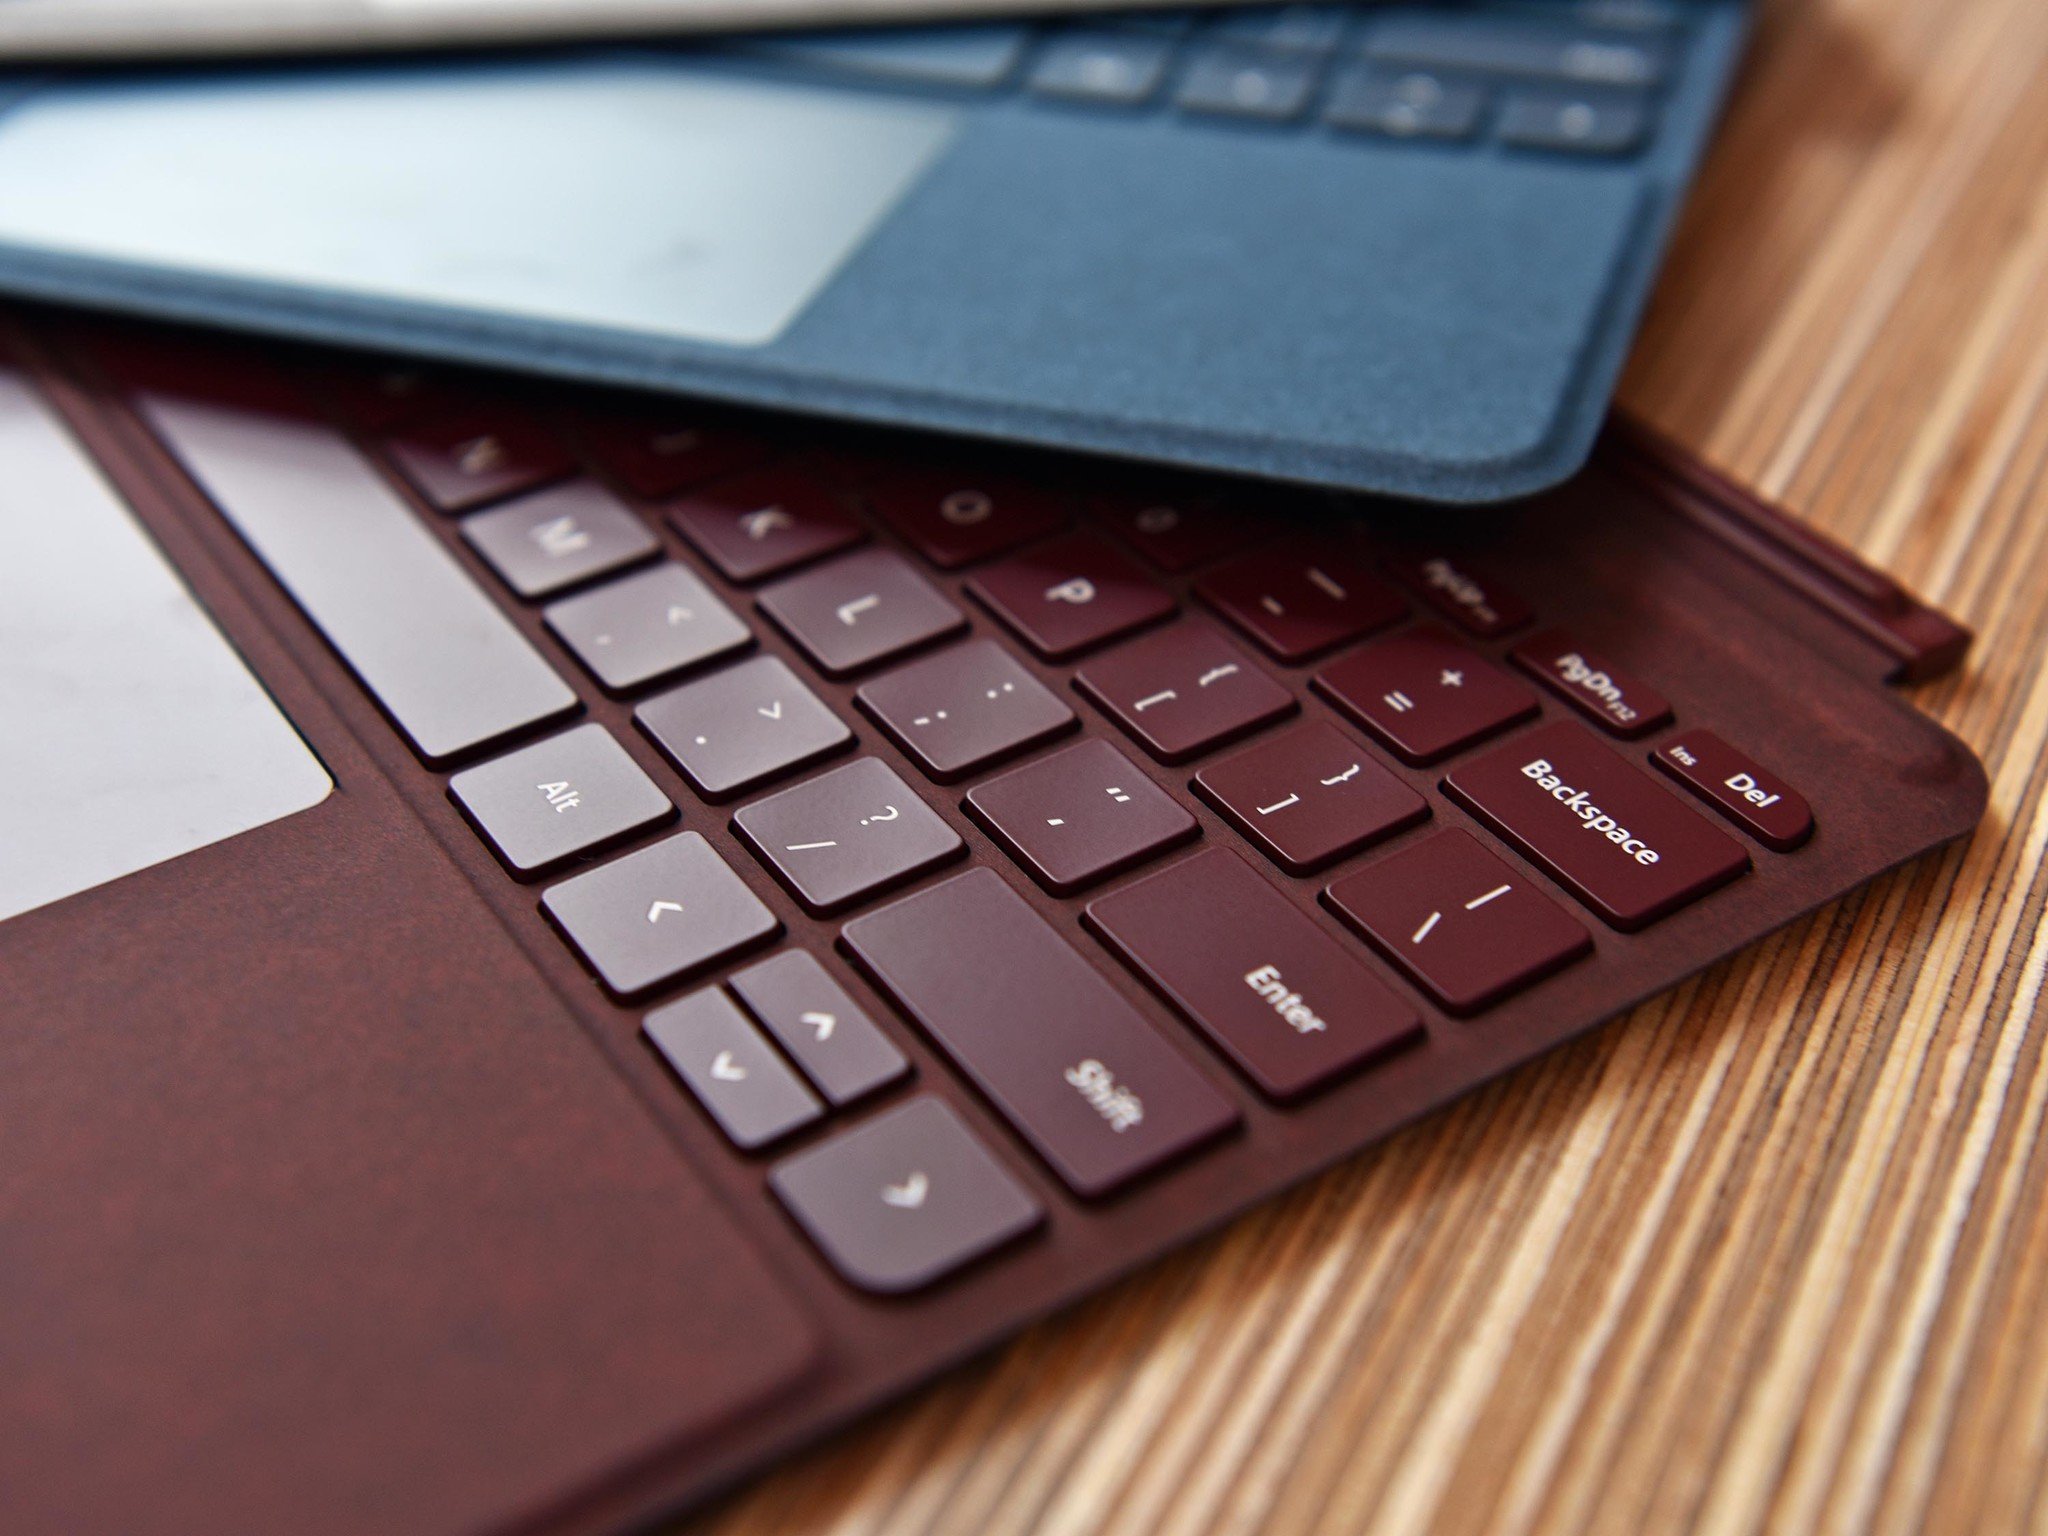 Surface Go has an attachable keyboard